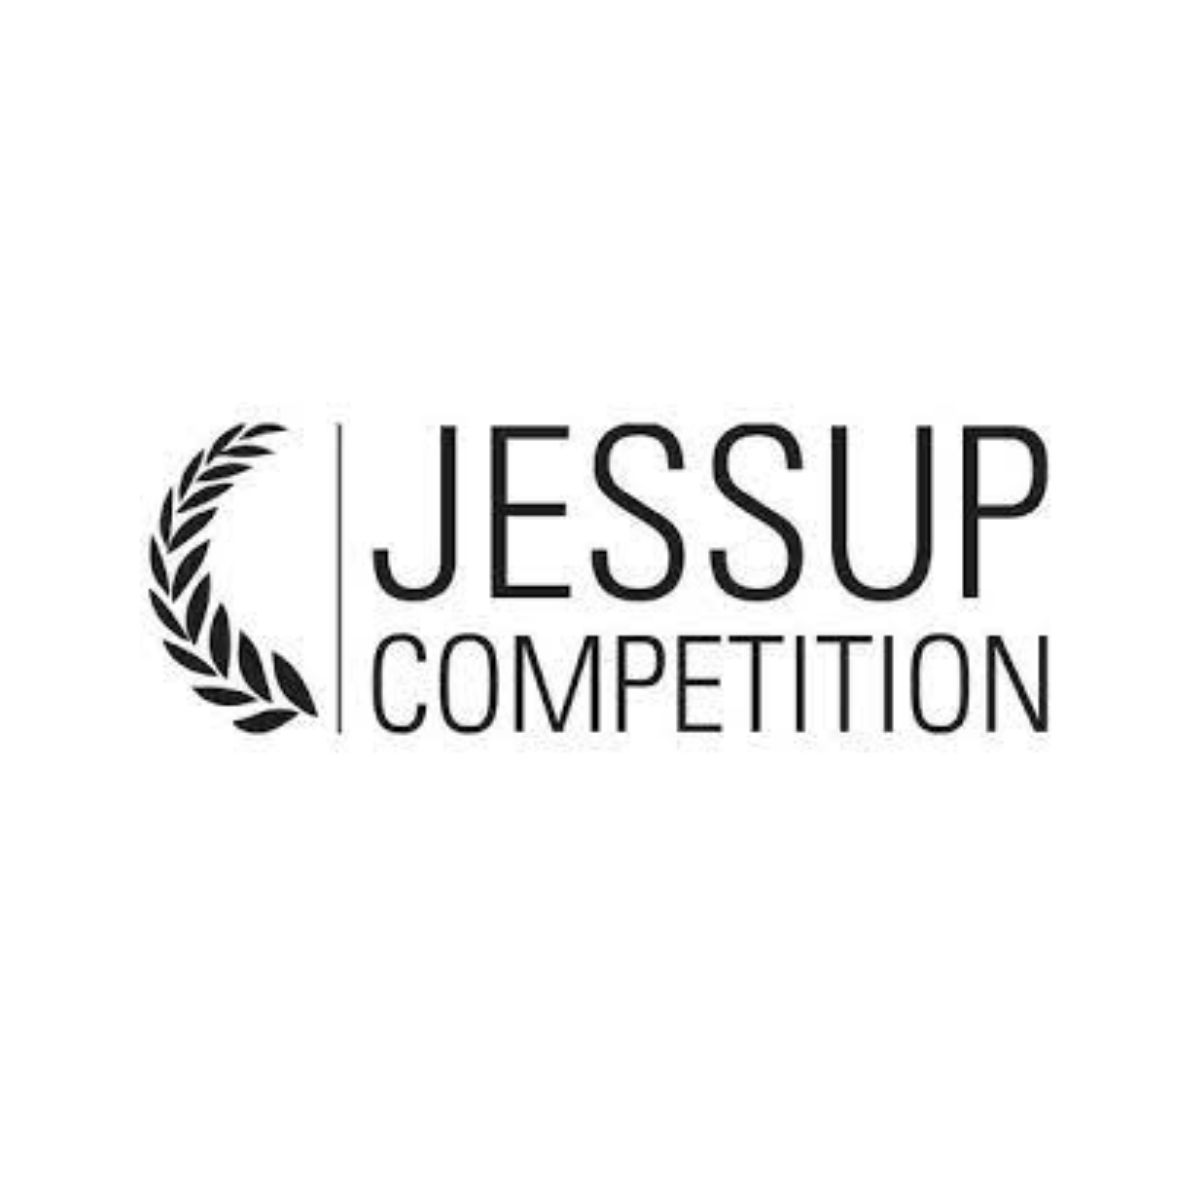 You are currently viewing Jessup Competition